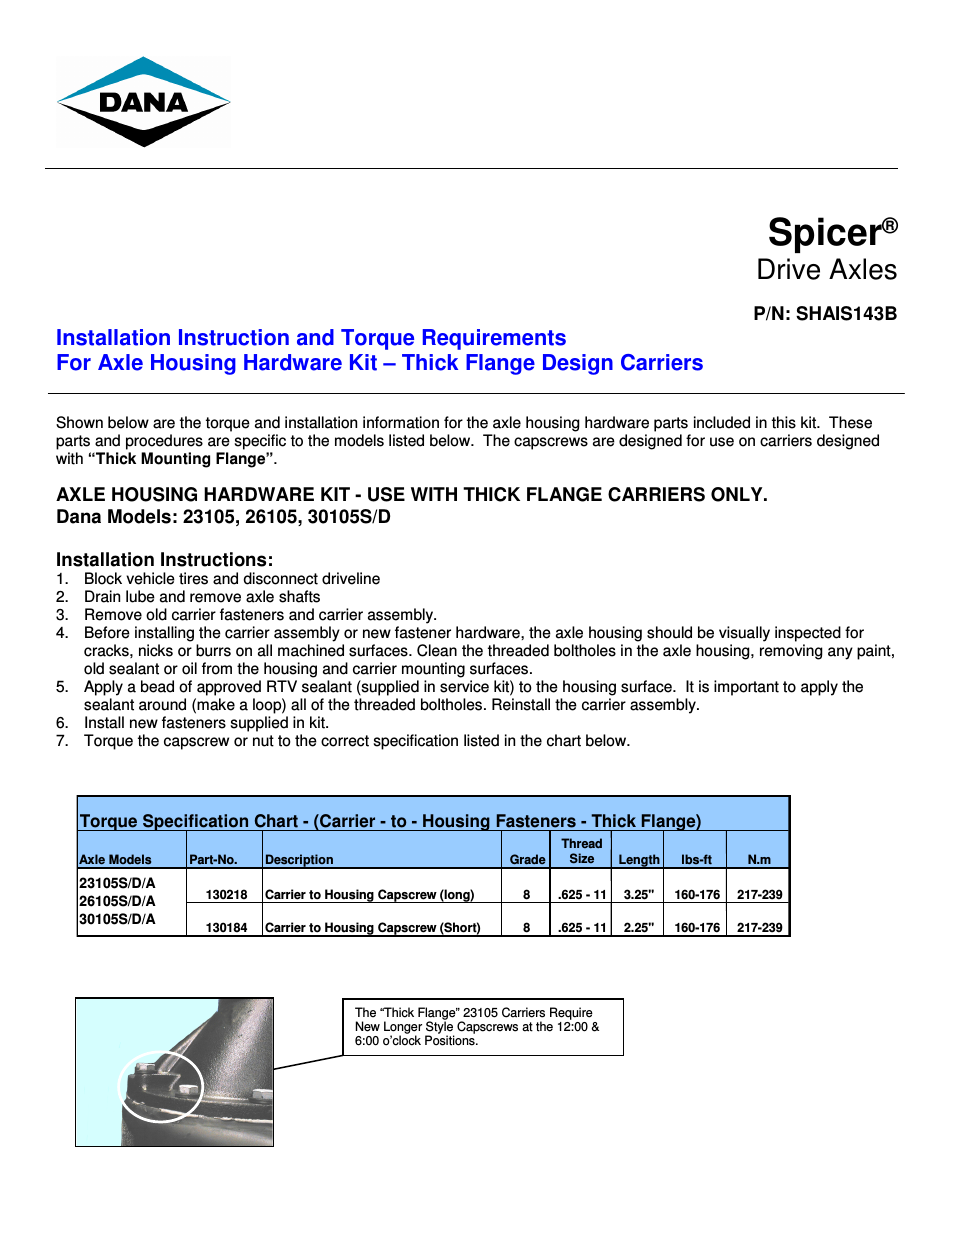 Thick Flange Design Carriers